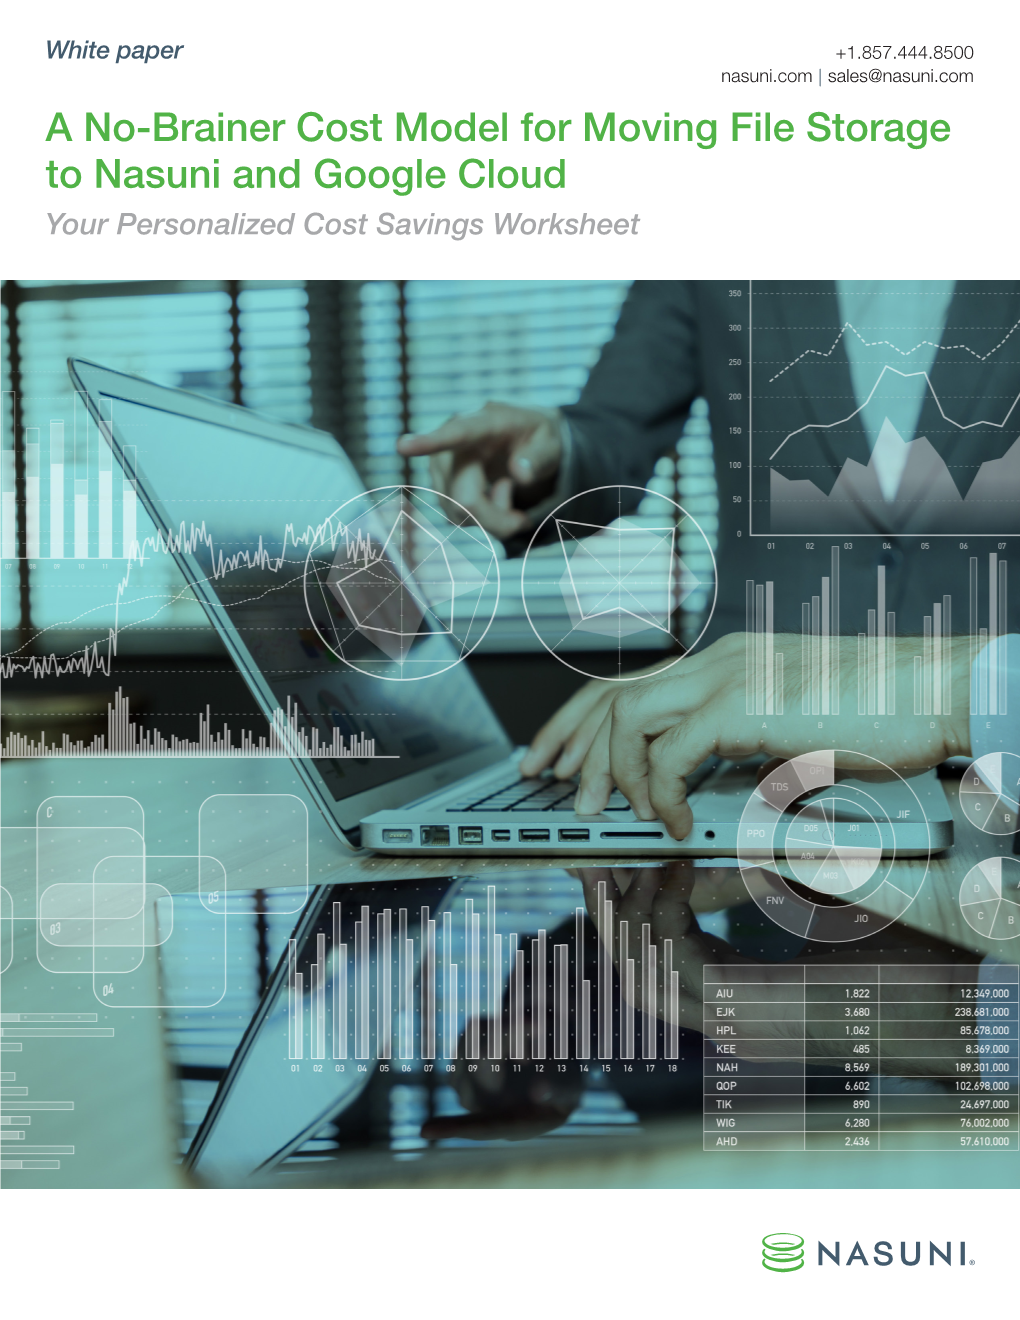 A No-Brainer Cost Model for Moving File Storage to Nasuni and Google